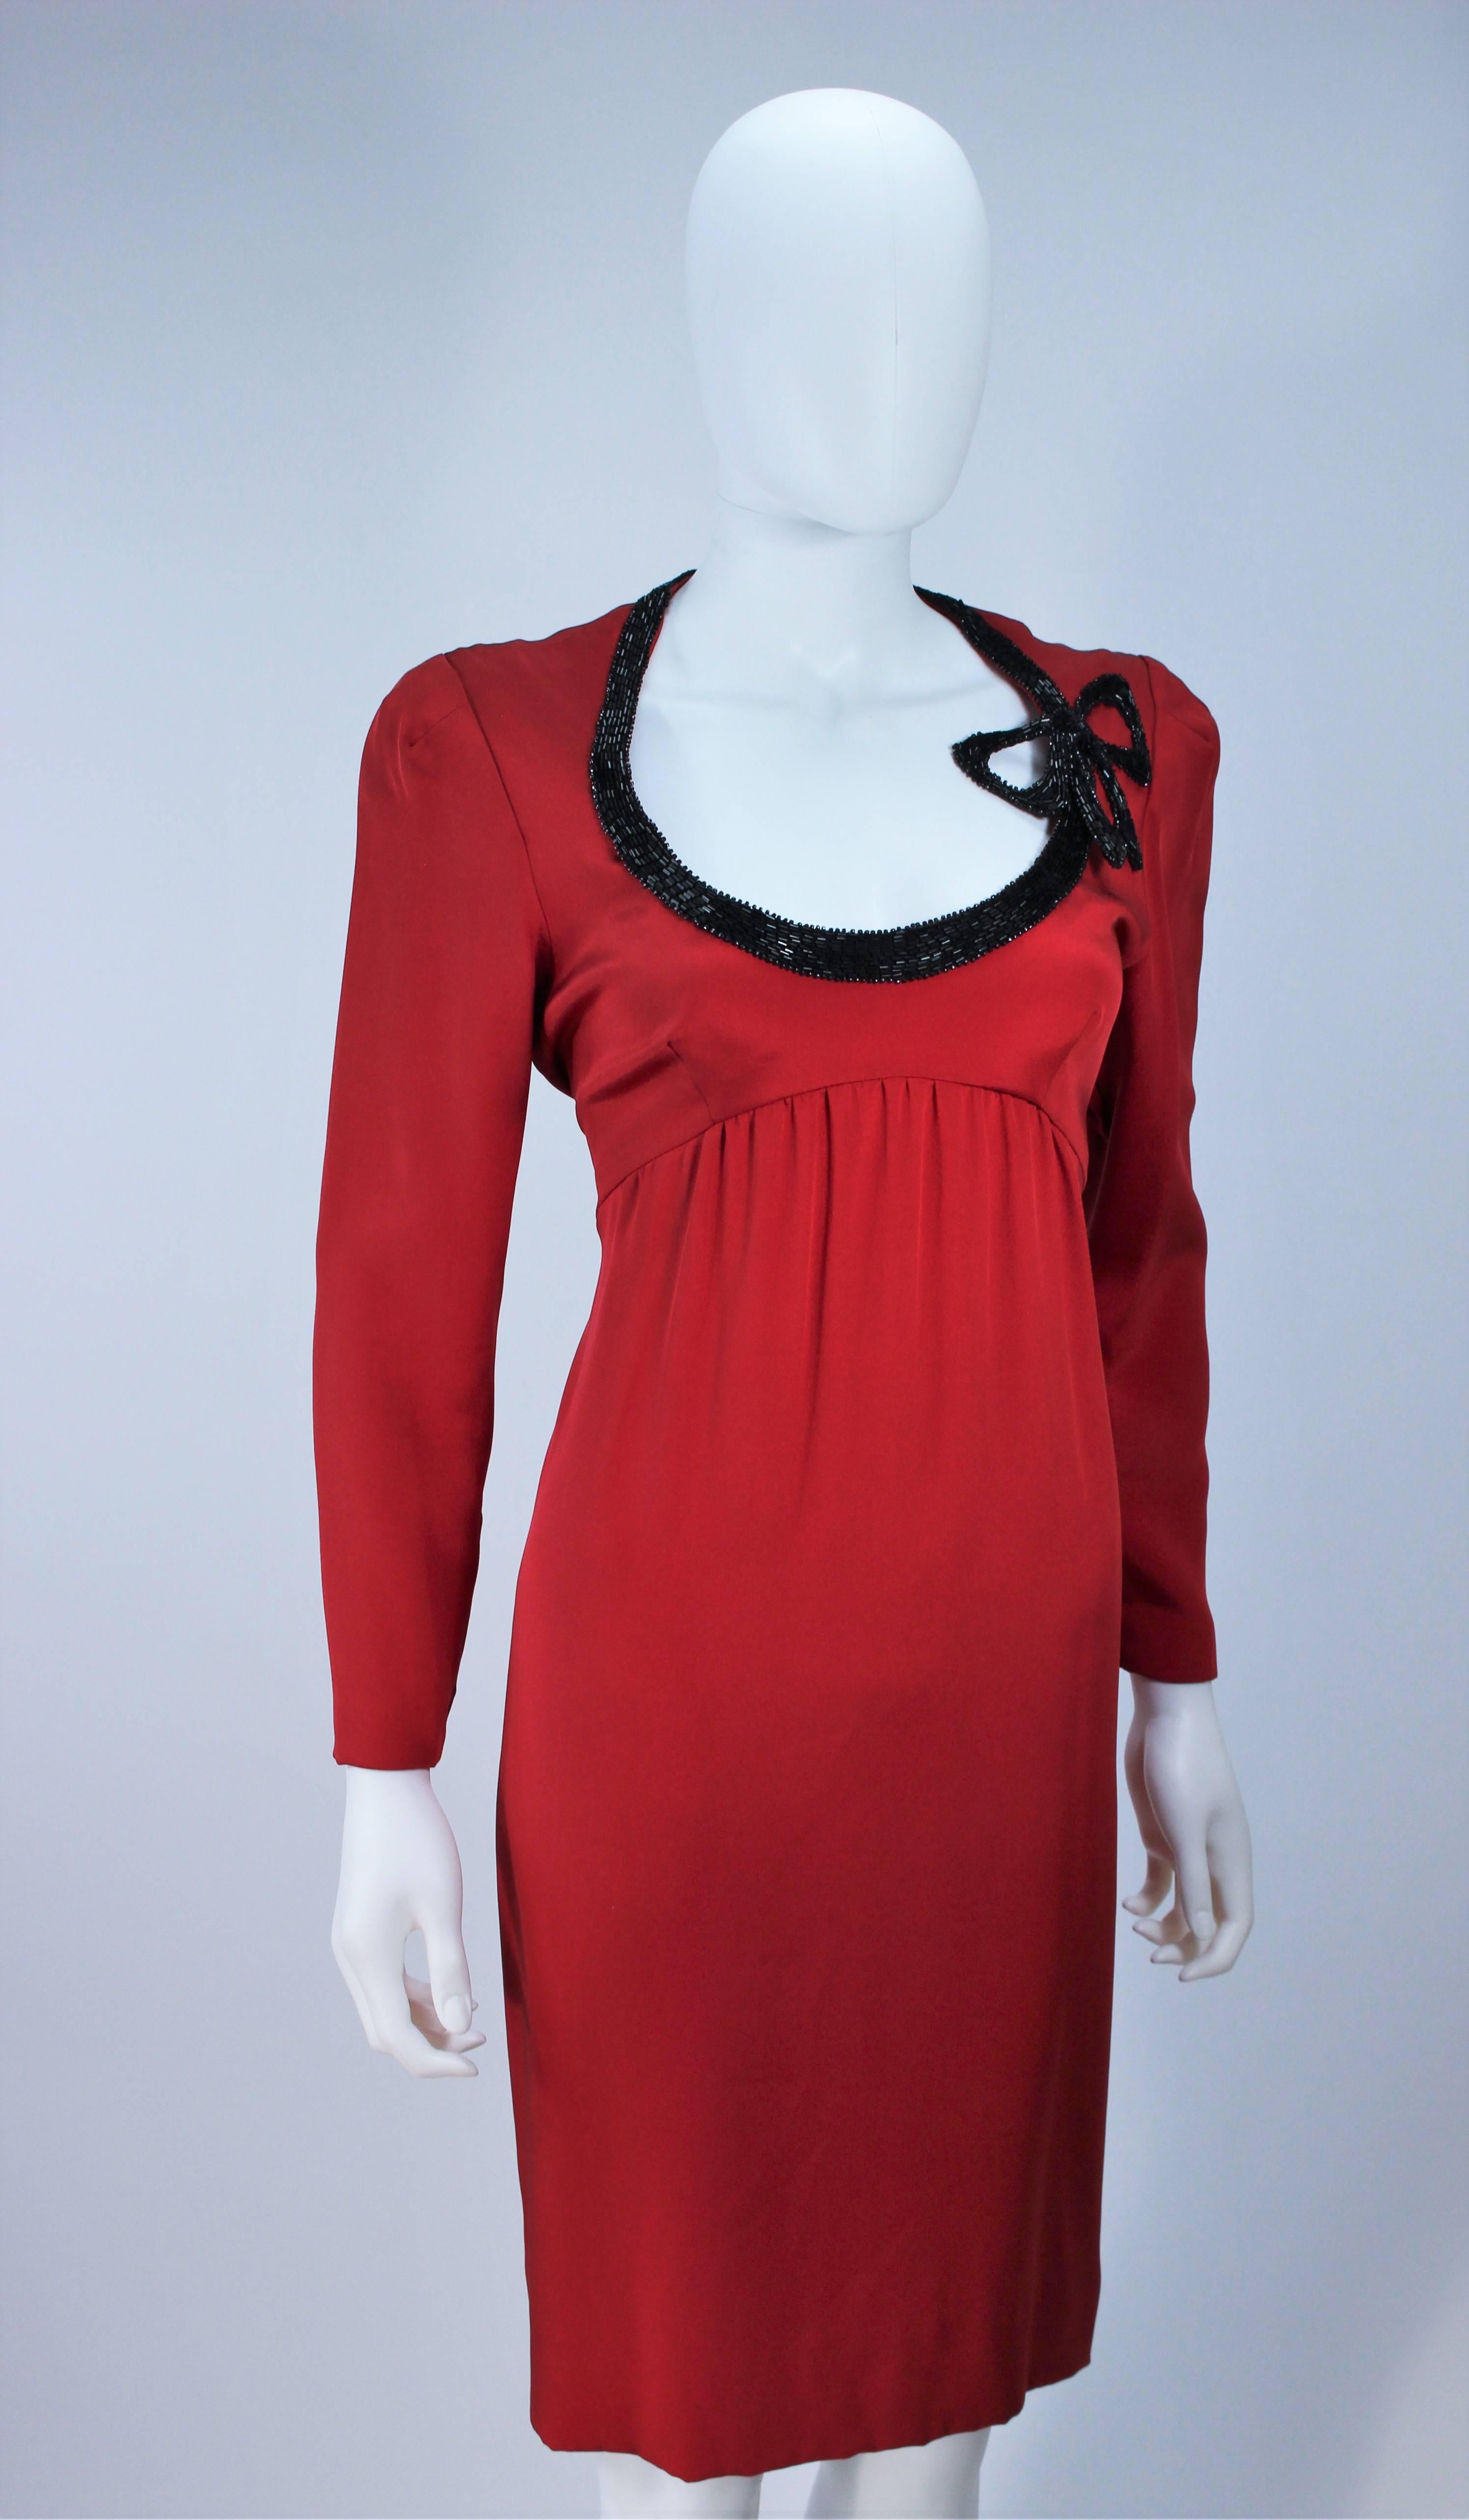 Women's BOB MACKIE Burnished Red Silk Dress with Black Beaded Bow Neckline Size 8 For Sale